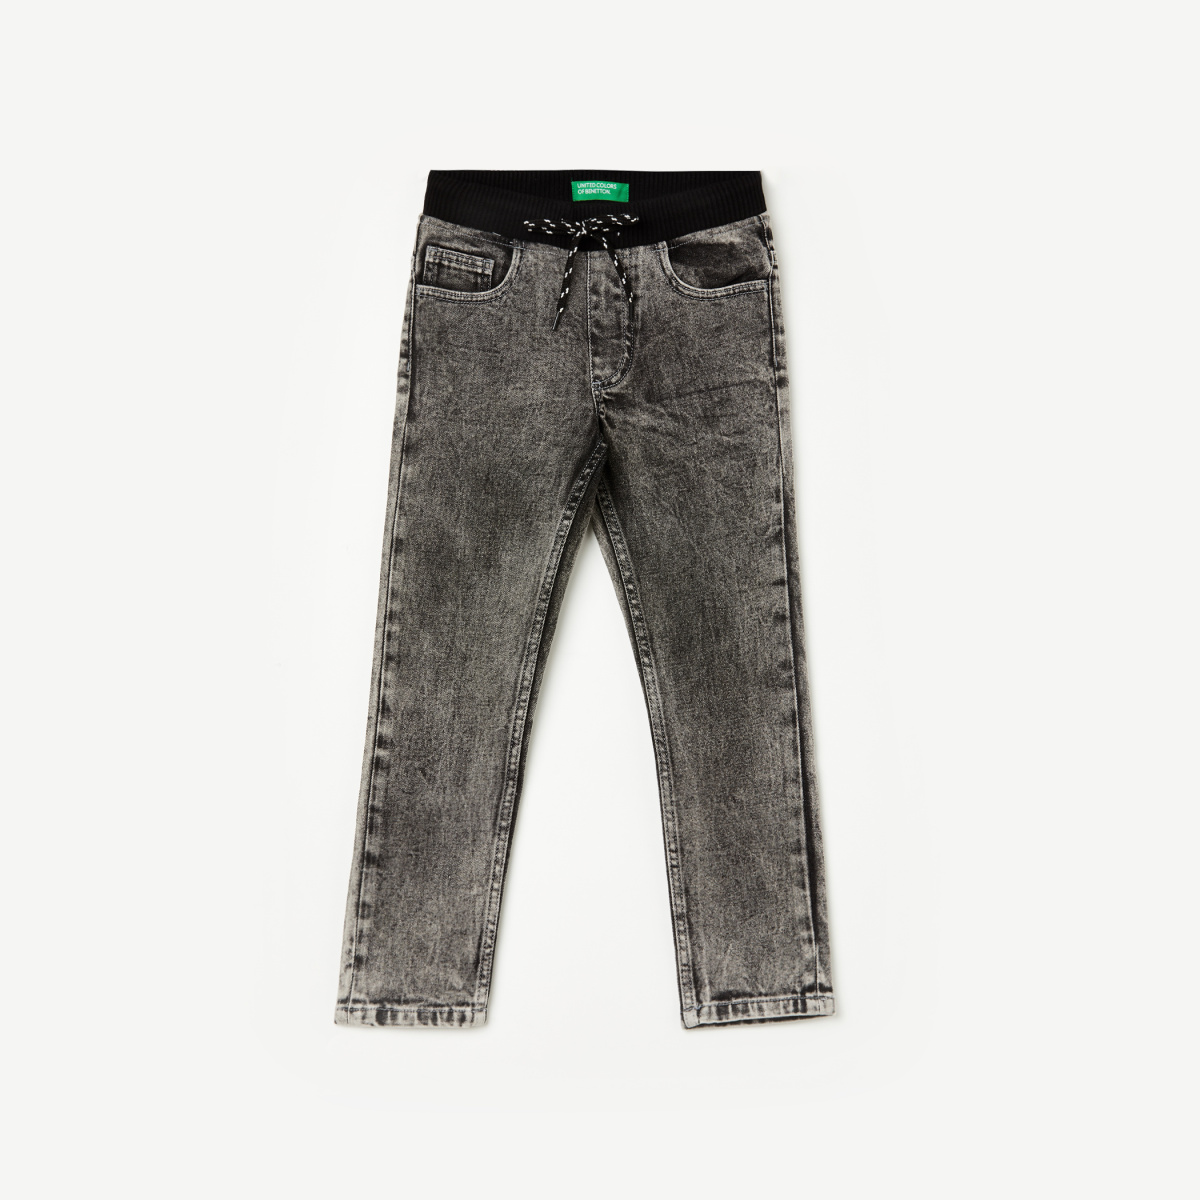 UNITED COLORS OF BENETTON Boys Stonewashed Jeans